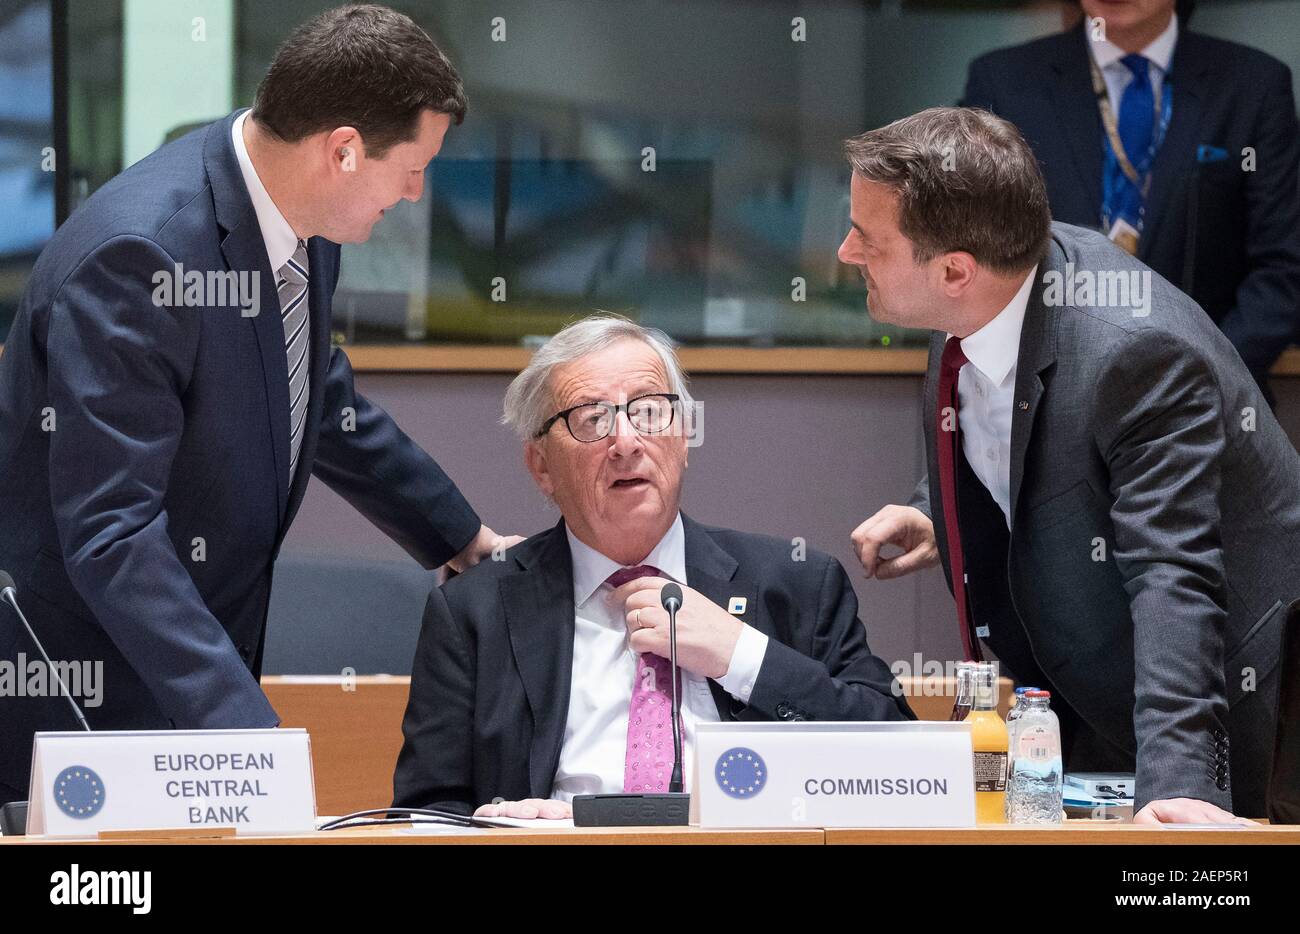 Belgium, Brussels, on Friday, June 21, 2019: Jean-Claude Juncker attending the European Summit of Heads of State, here talking with Martin Selmayr and Stock Photo